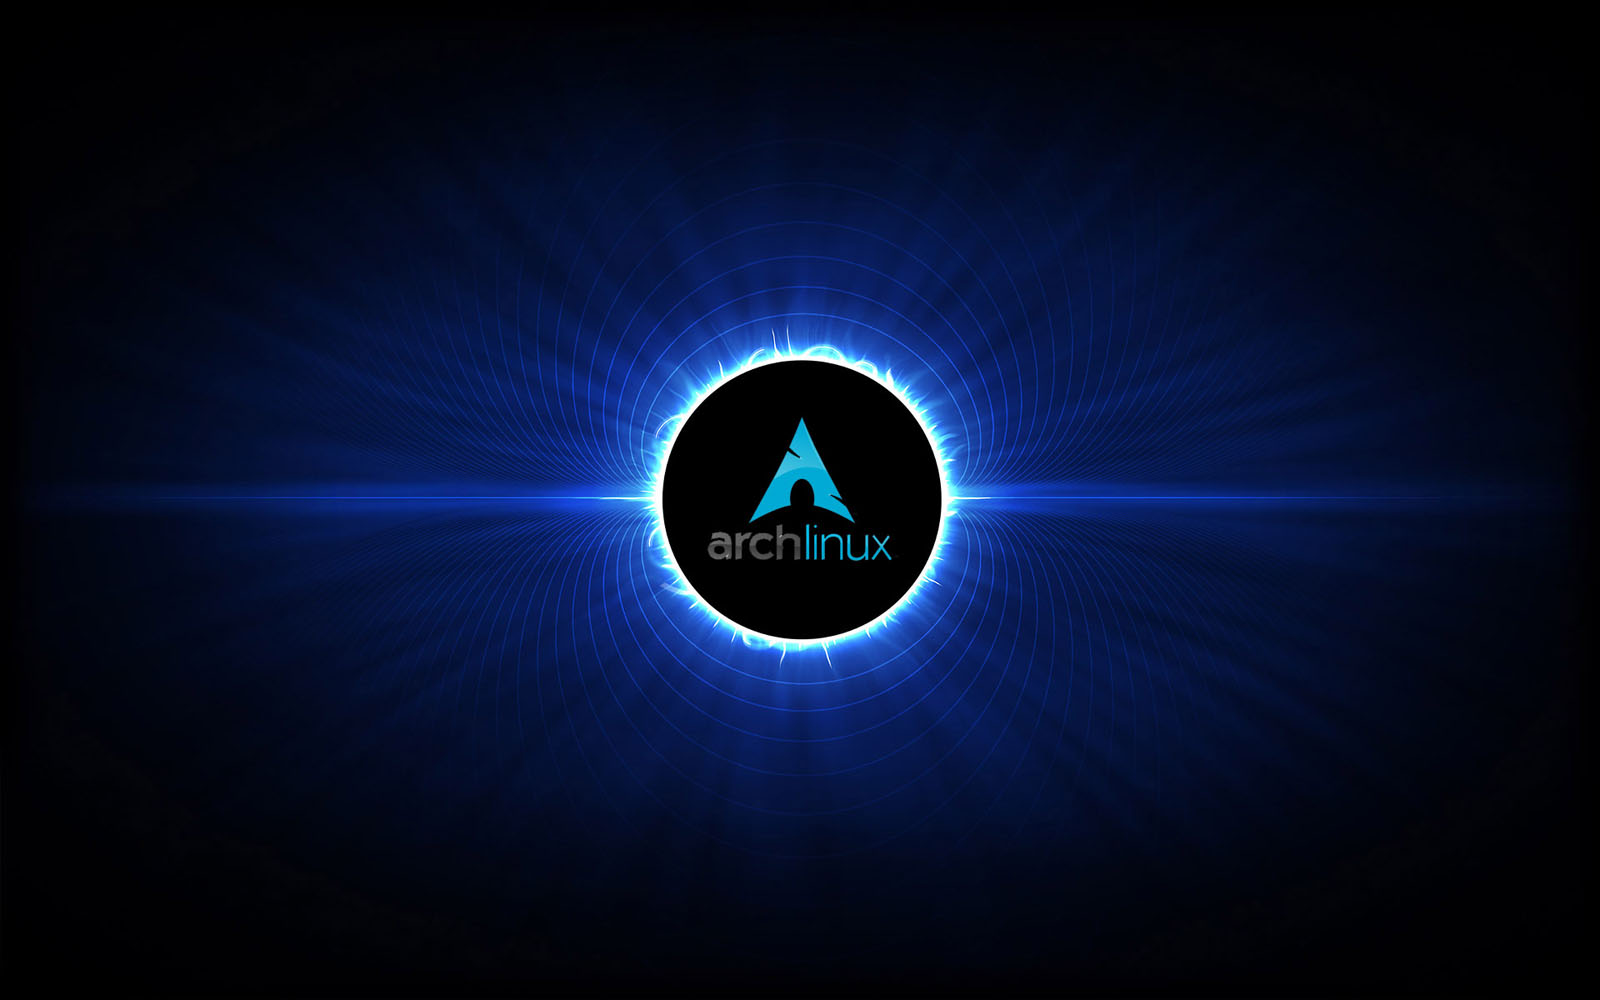 Tag Arch Linux Wallpapers Backgrounds Photos Images andPictures